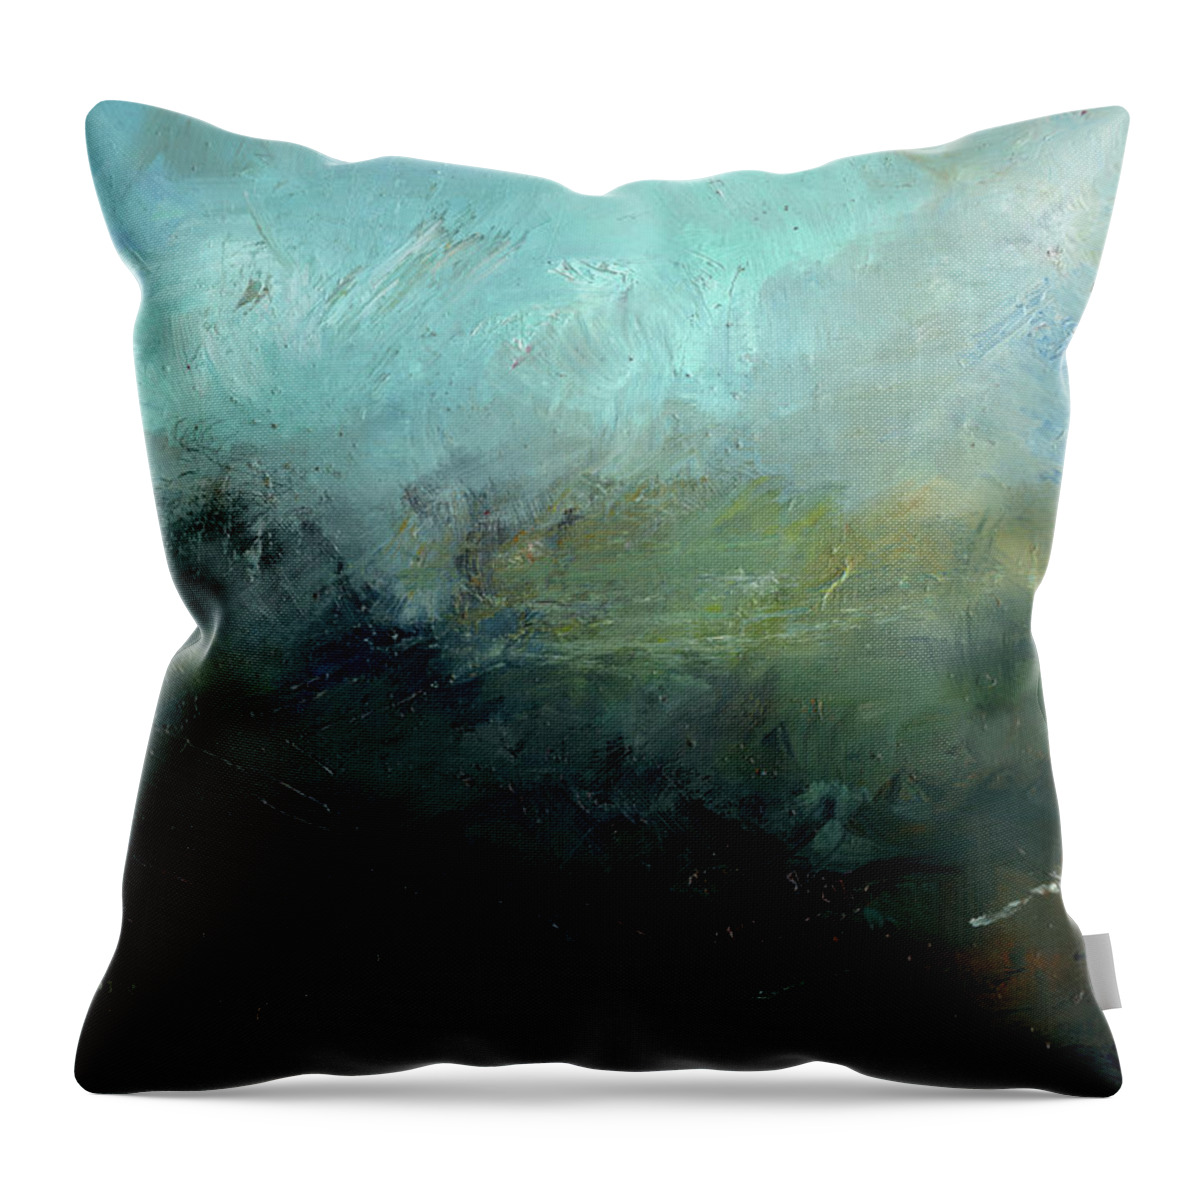 Abstract Seascape Throw Pillow featuring the painting Ocean abstract seascape by Juan Bosco